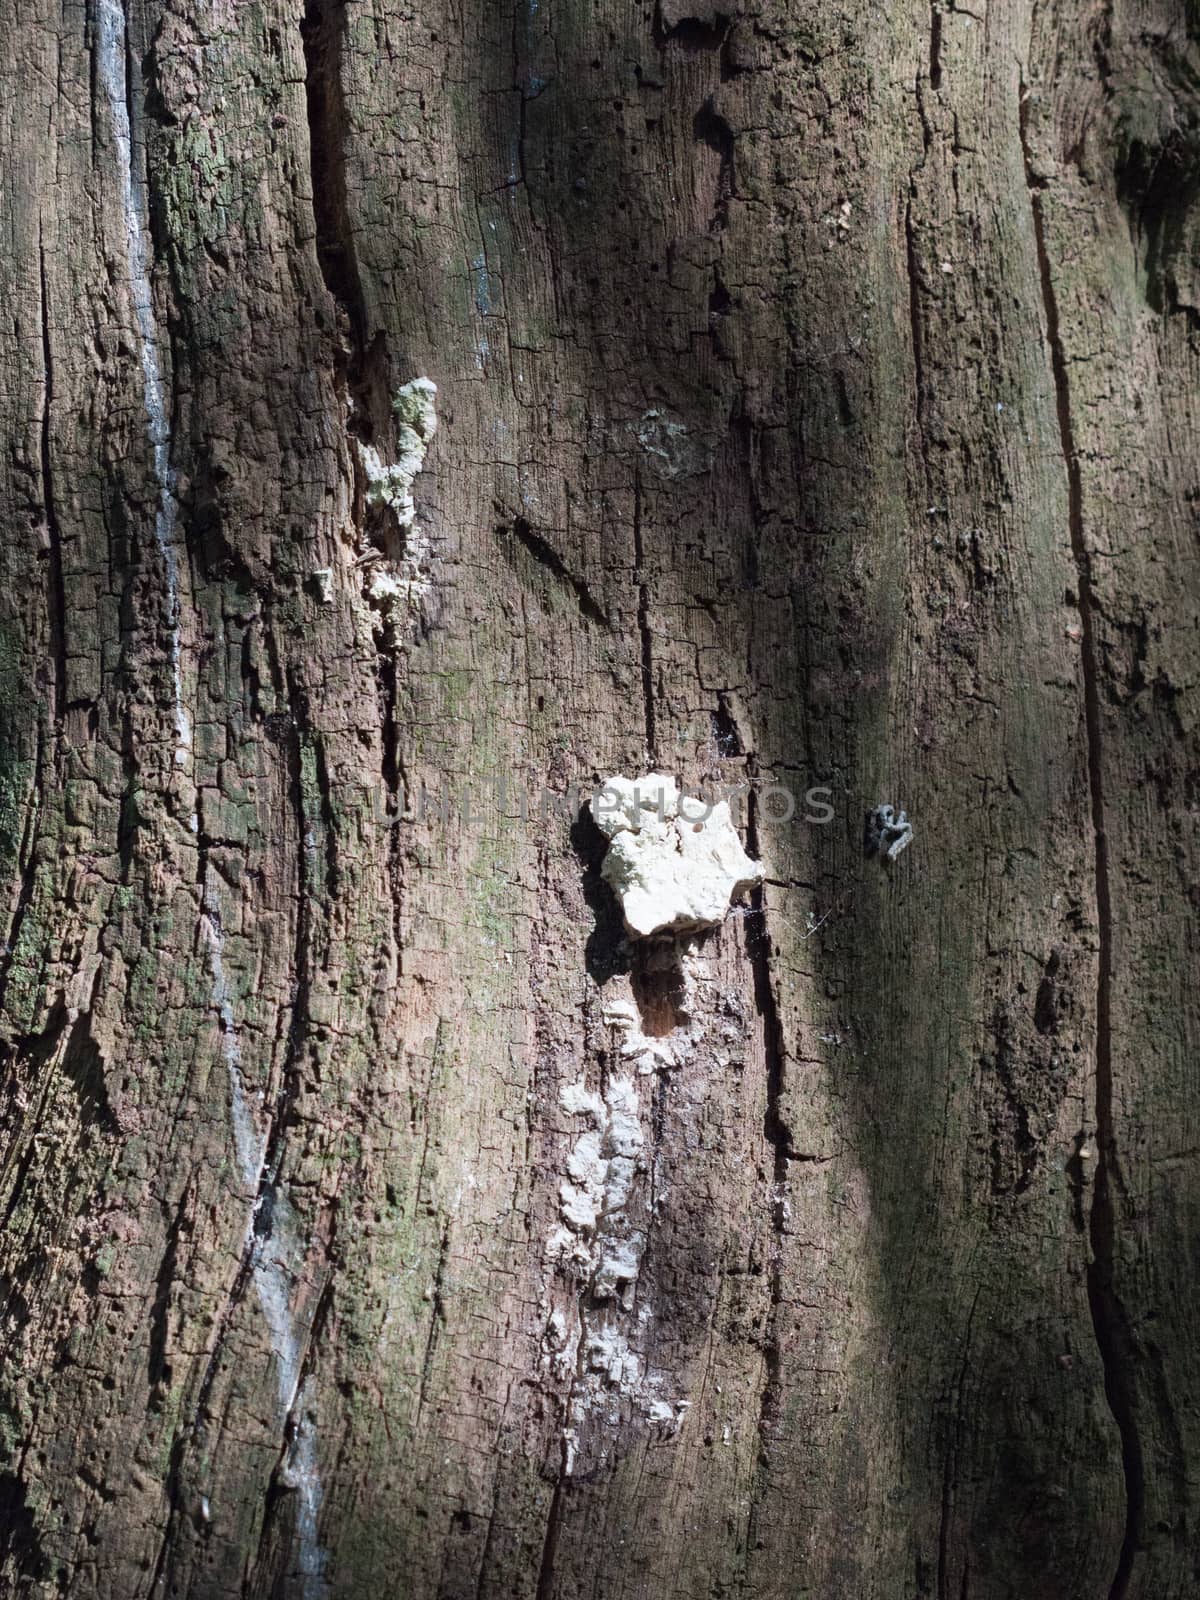 A Small Clump of White Fungus Growing on the Side Bark of A tree with Cracks and Streaks and Texture in Spring